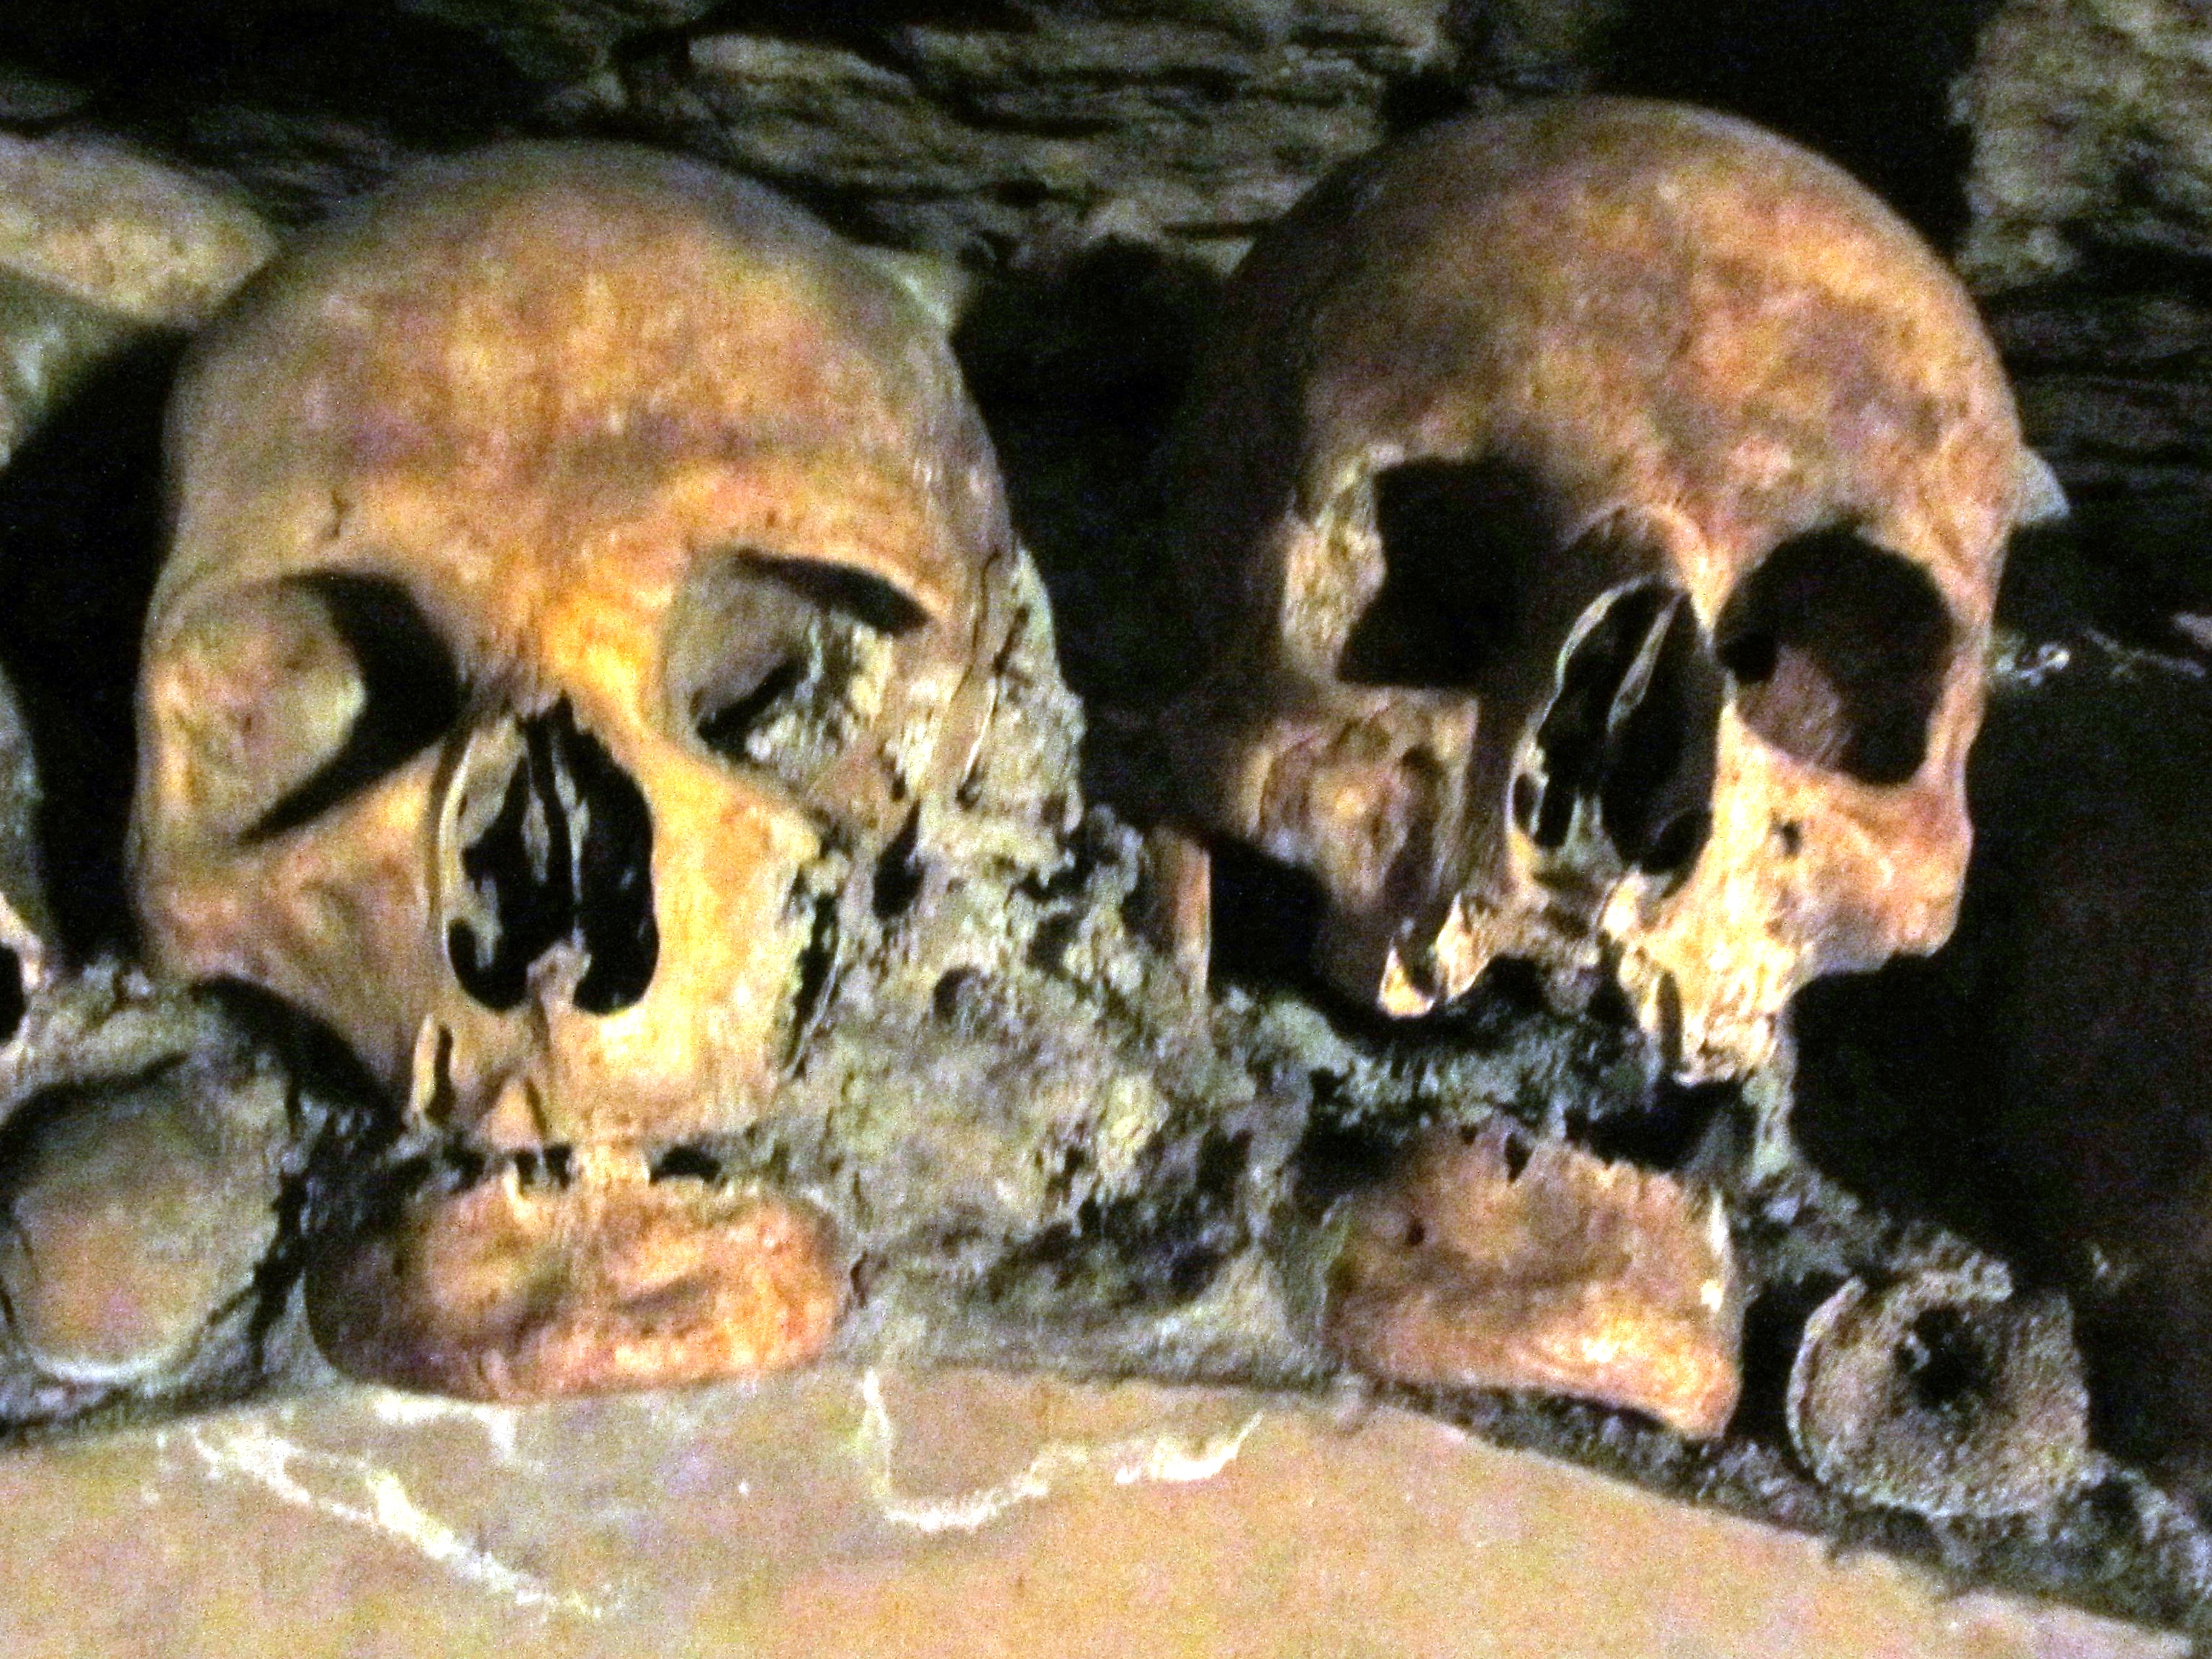 Catacombs of Paris are a MUST!!!